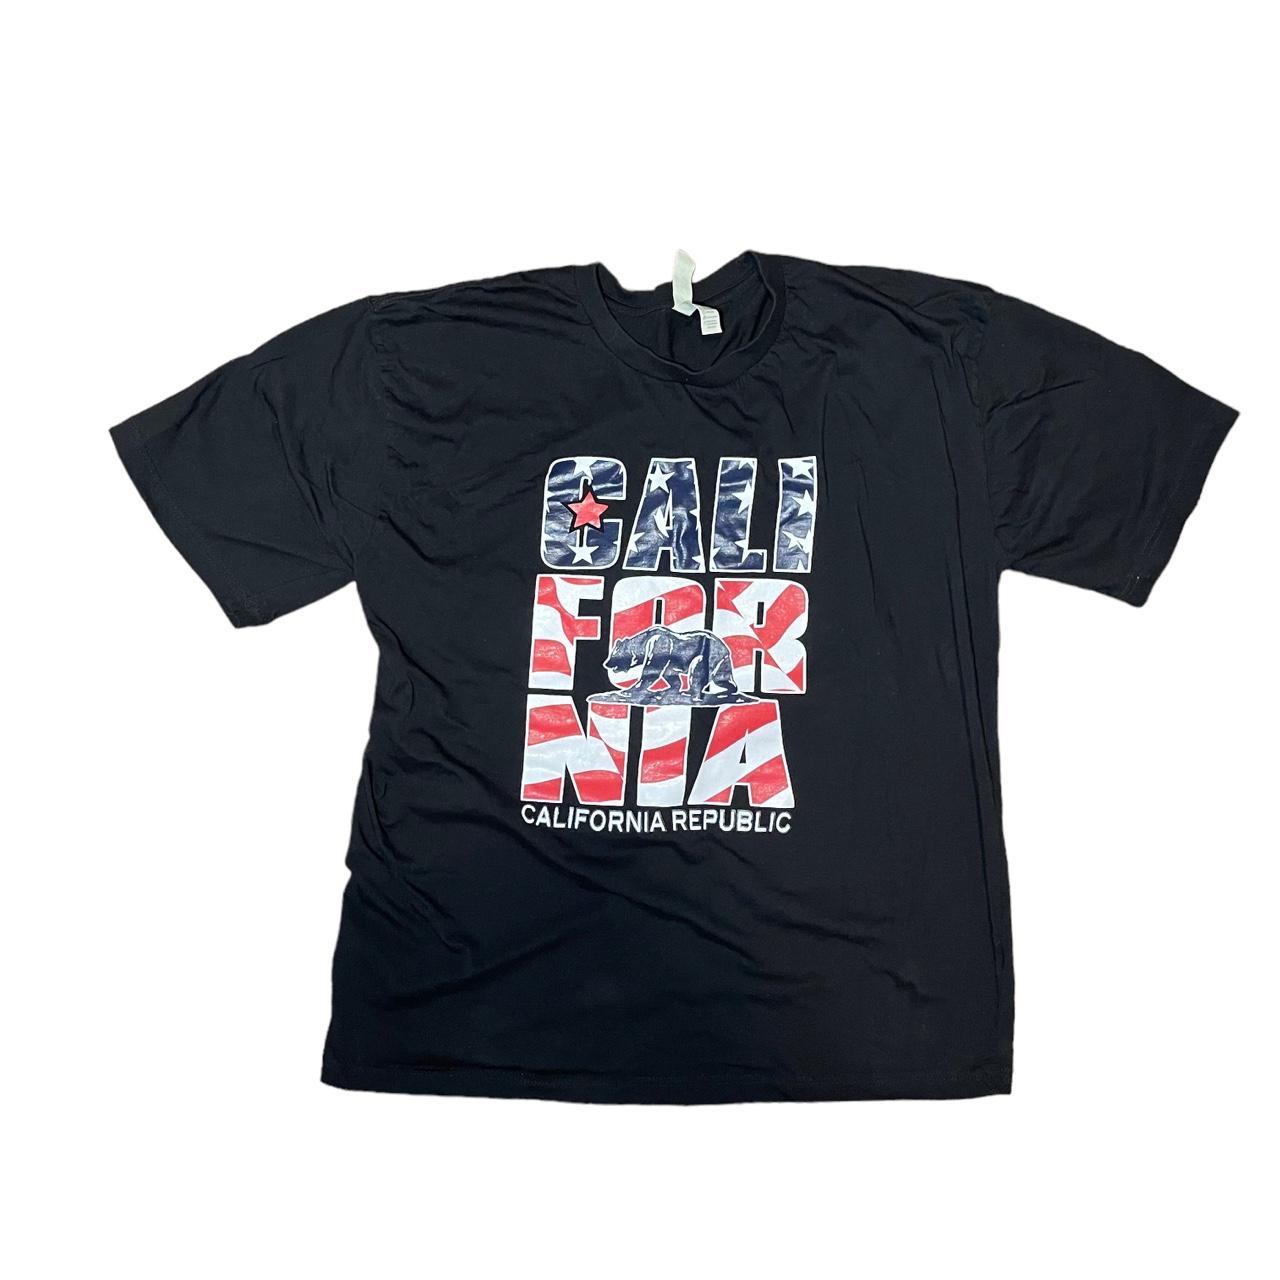 California Looks Men's Black and Red T-shirt